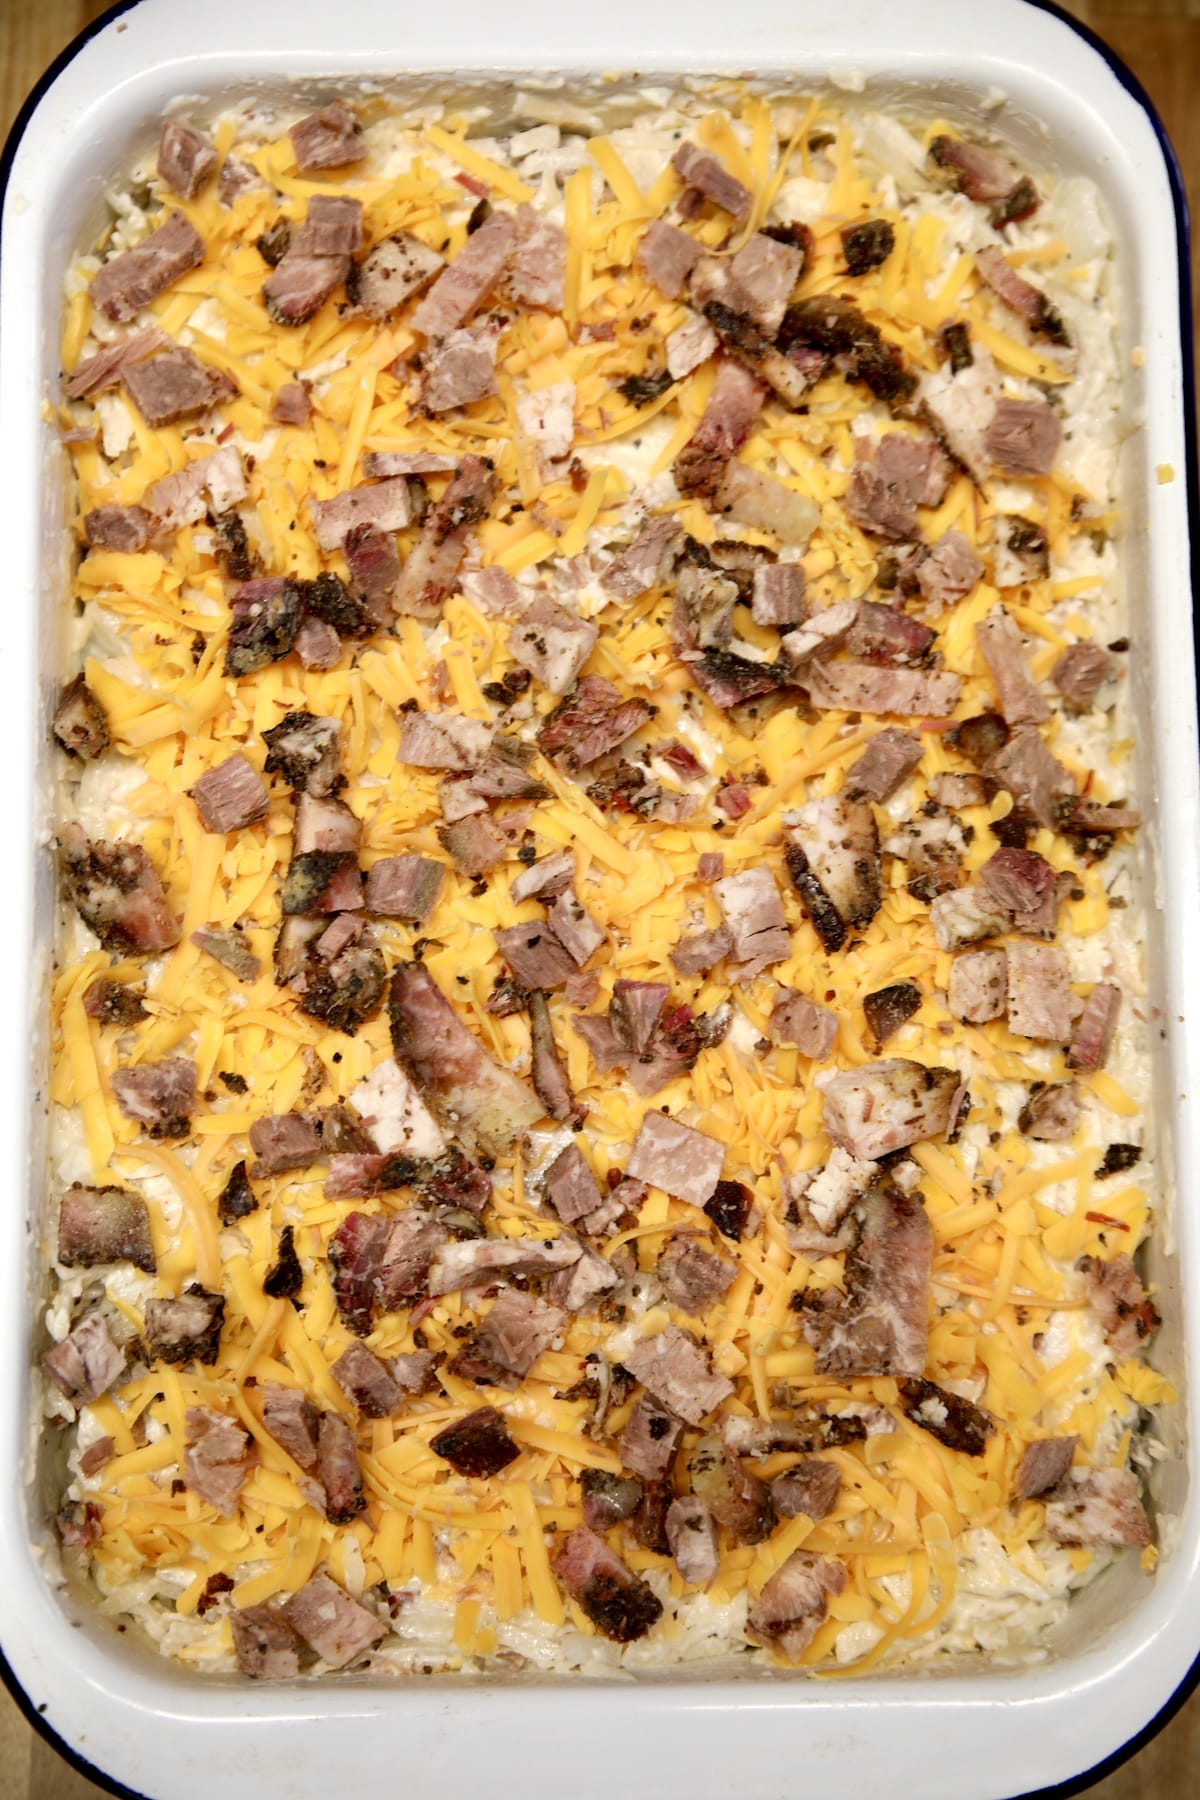 Hashbrown casserole with cheese and brisket.